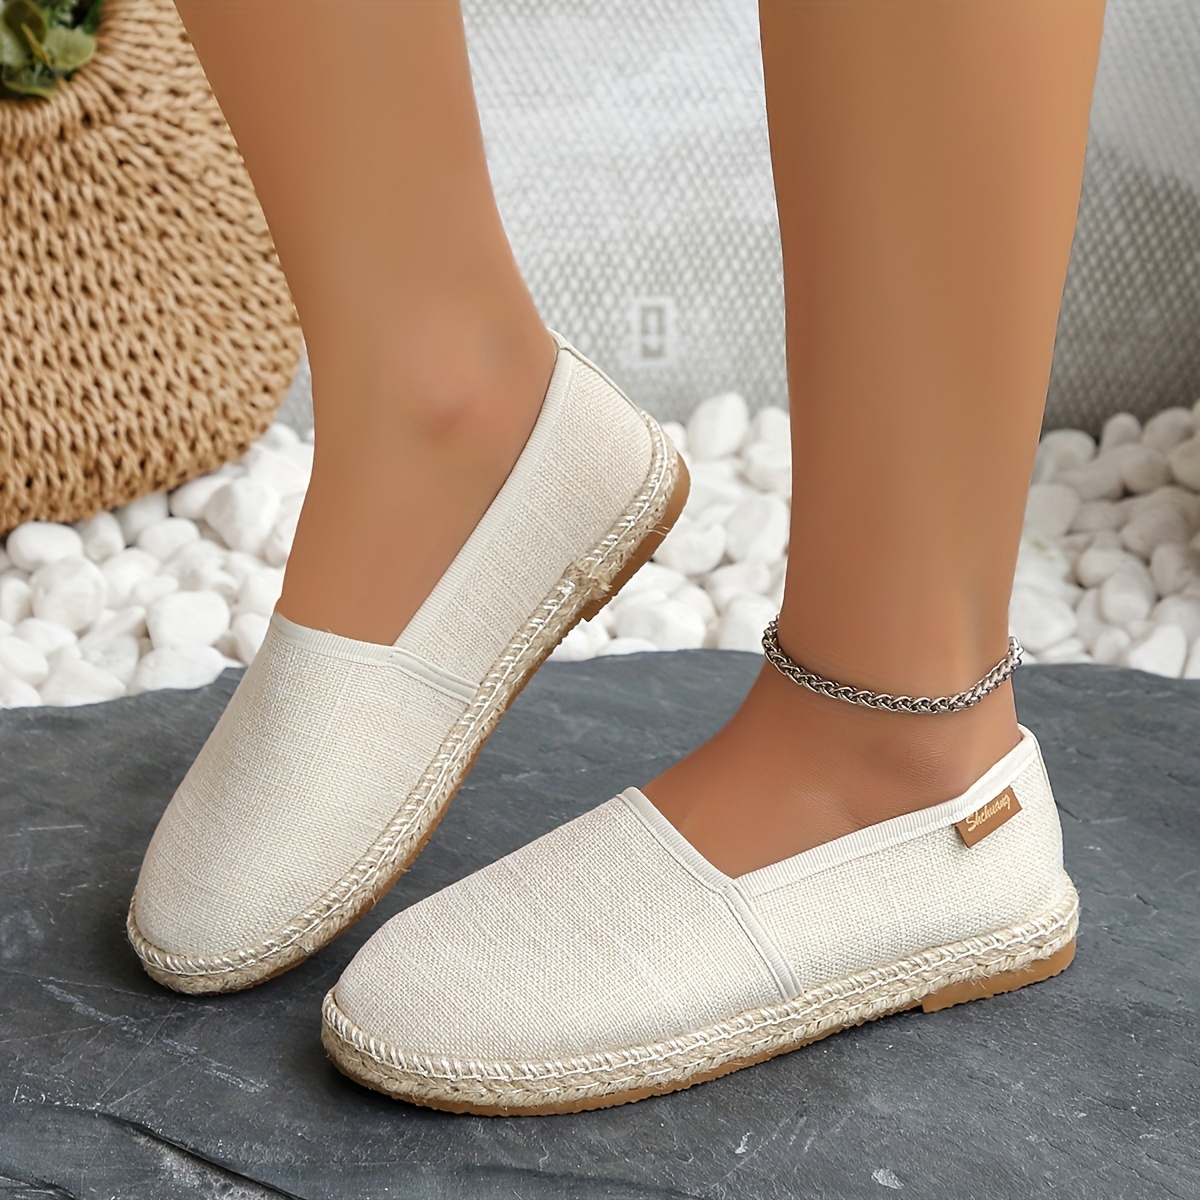 

Women's Espadrilles Comfort Flats, Soft Sole Lightweight Daily Footwear, Breathable Travel Shoes